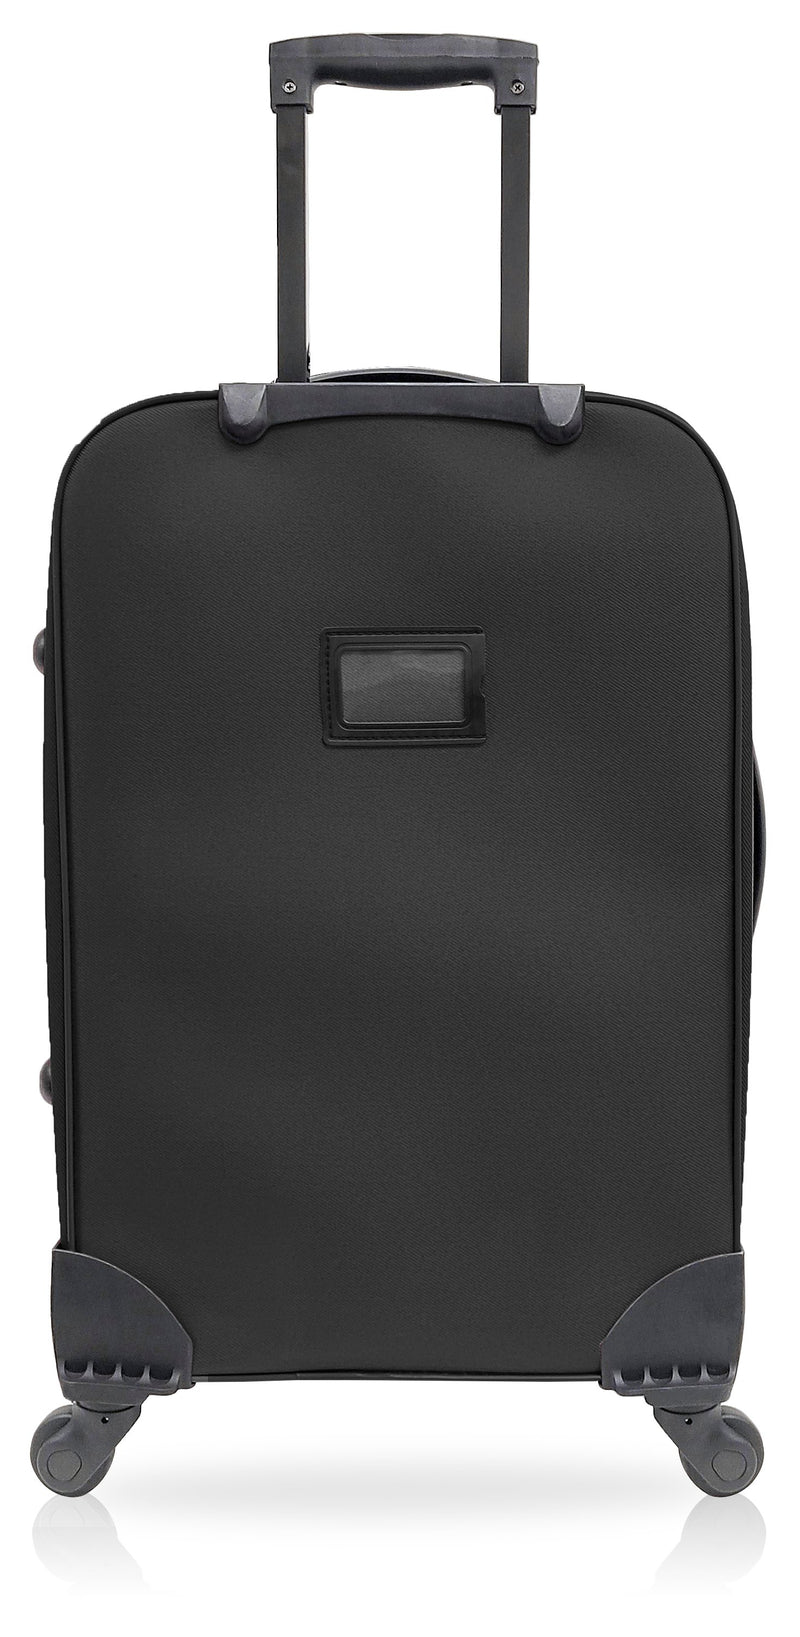 TOSCANO by Tucci 28-inch Parata Lightweight Luggage Suitcase